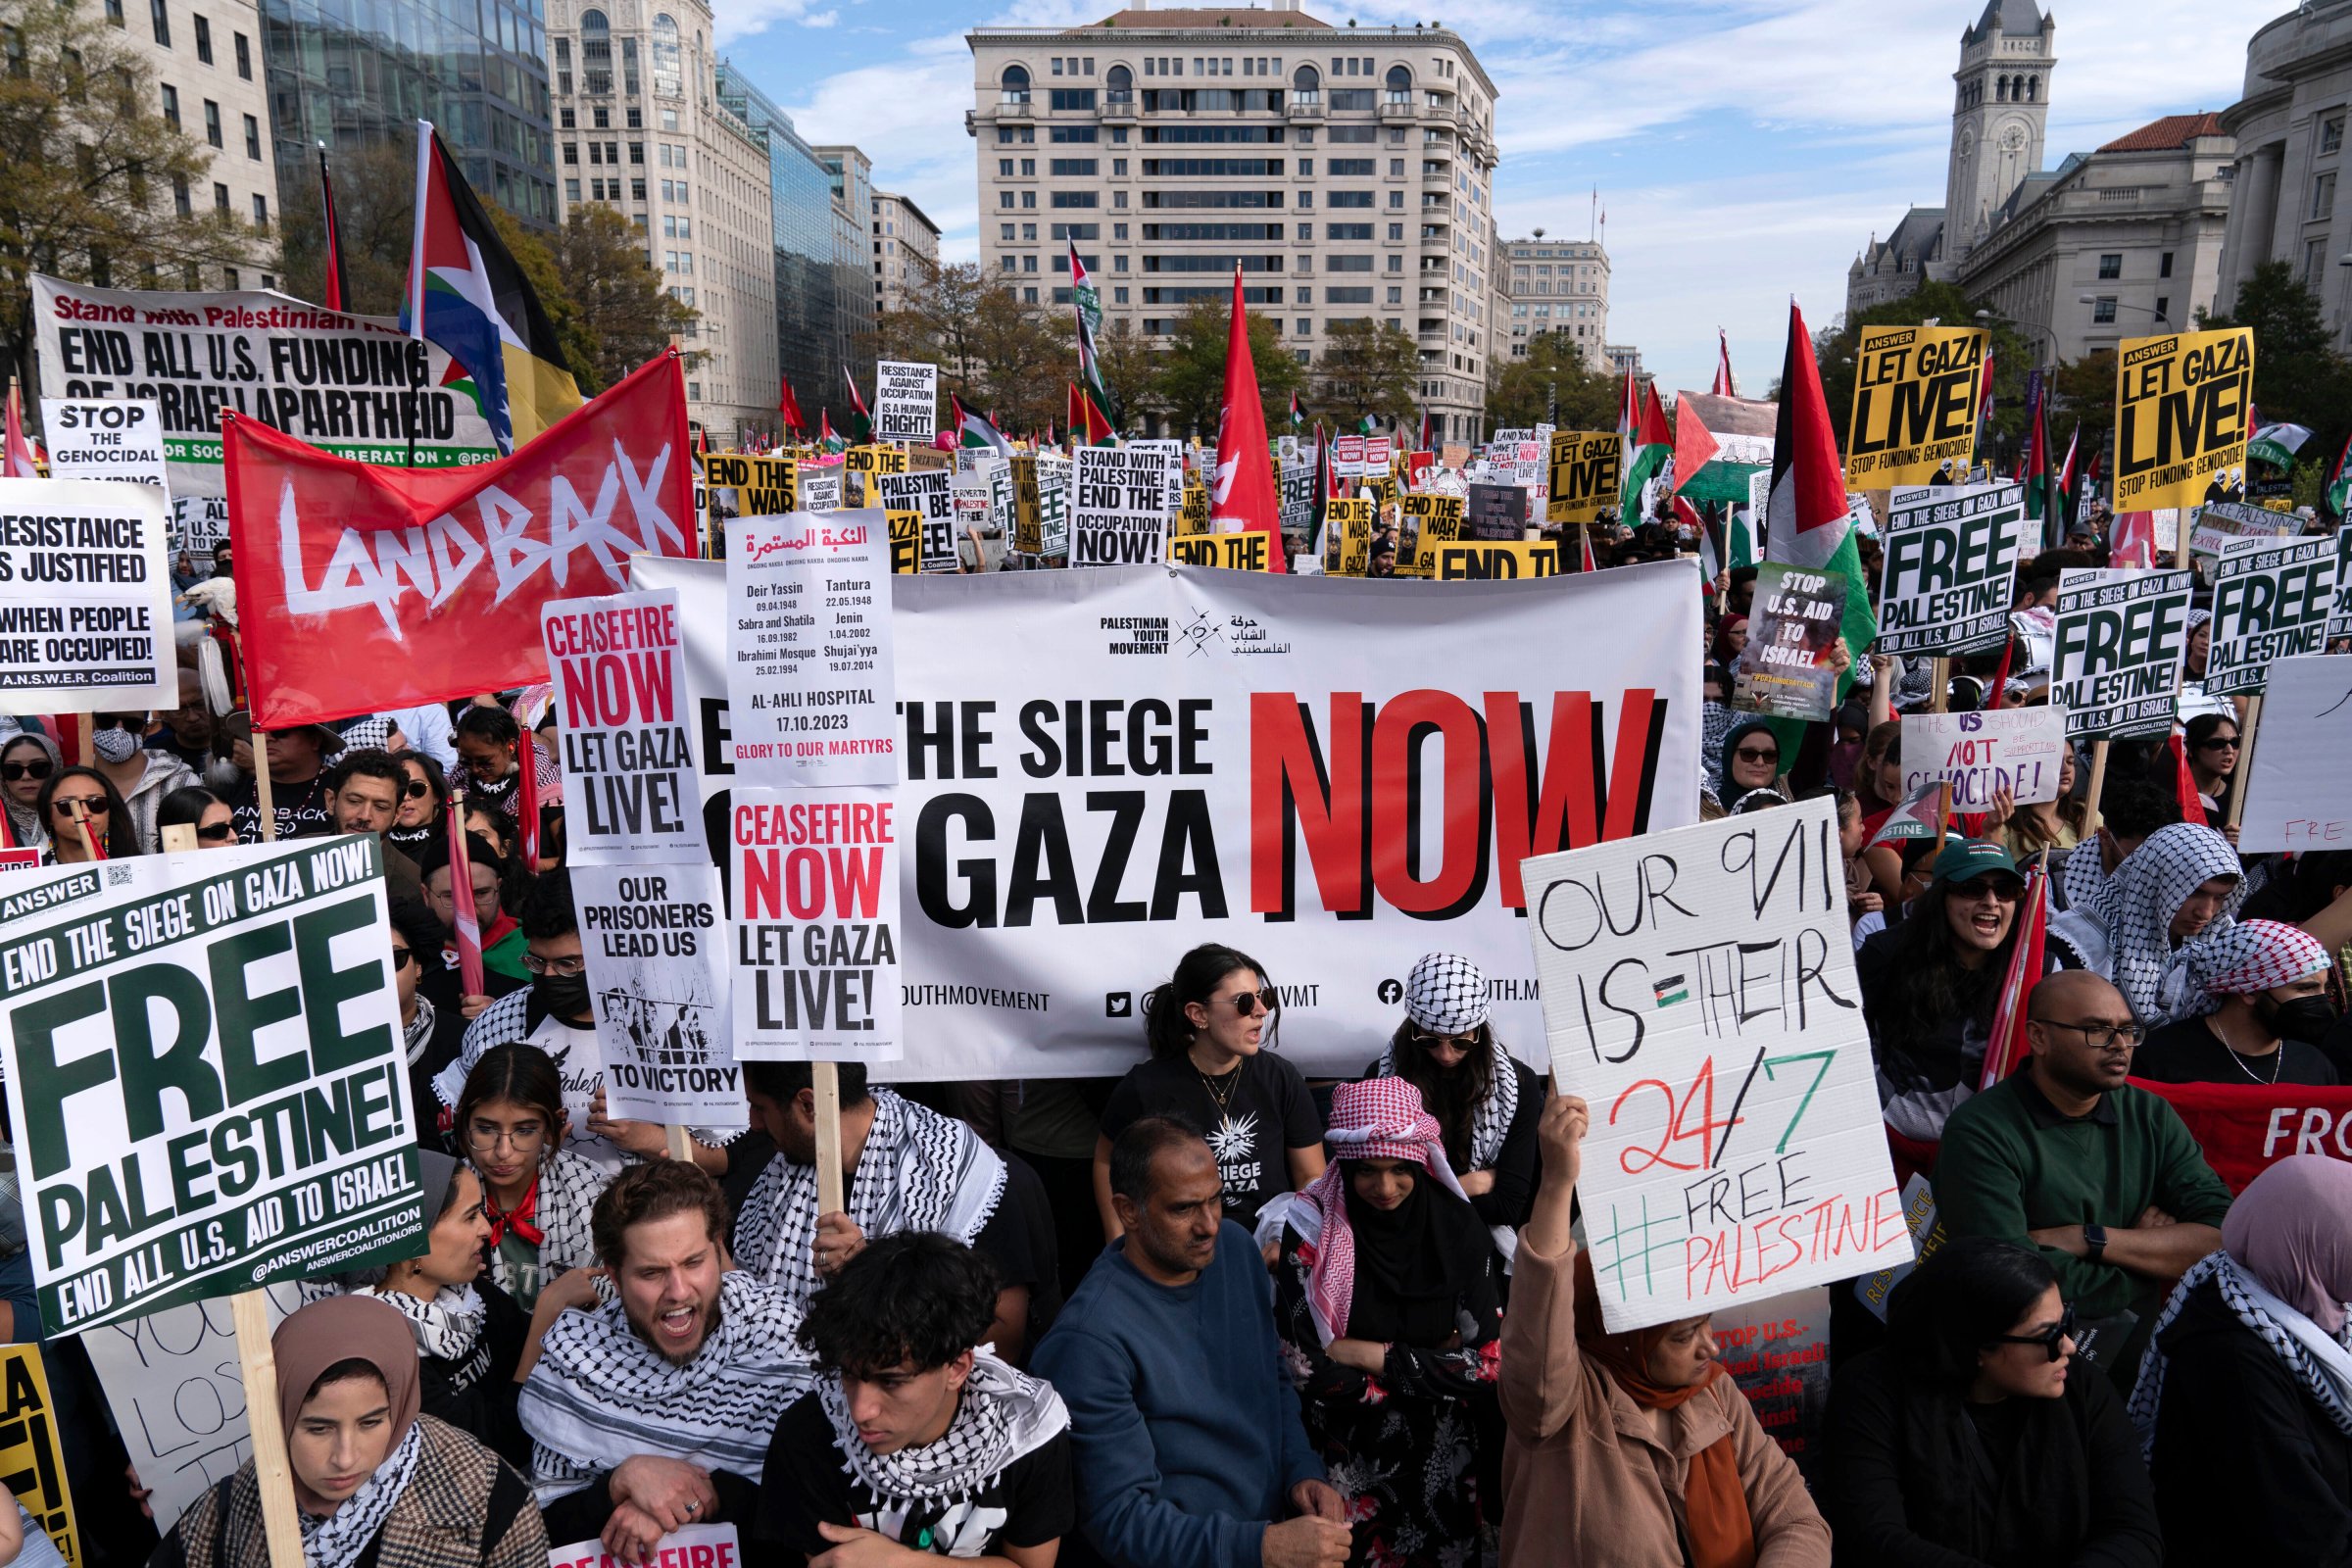 Global Protest Marches Demand Immediate Humanitarian Cessation of Israeli Bombing in Gaza (time.com)